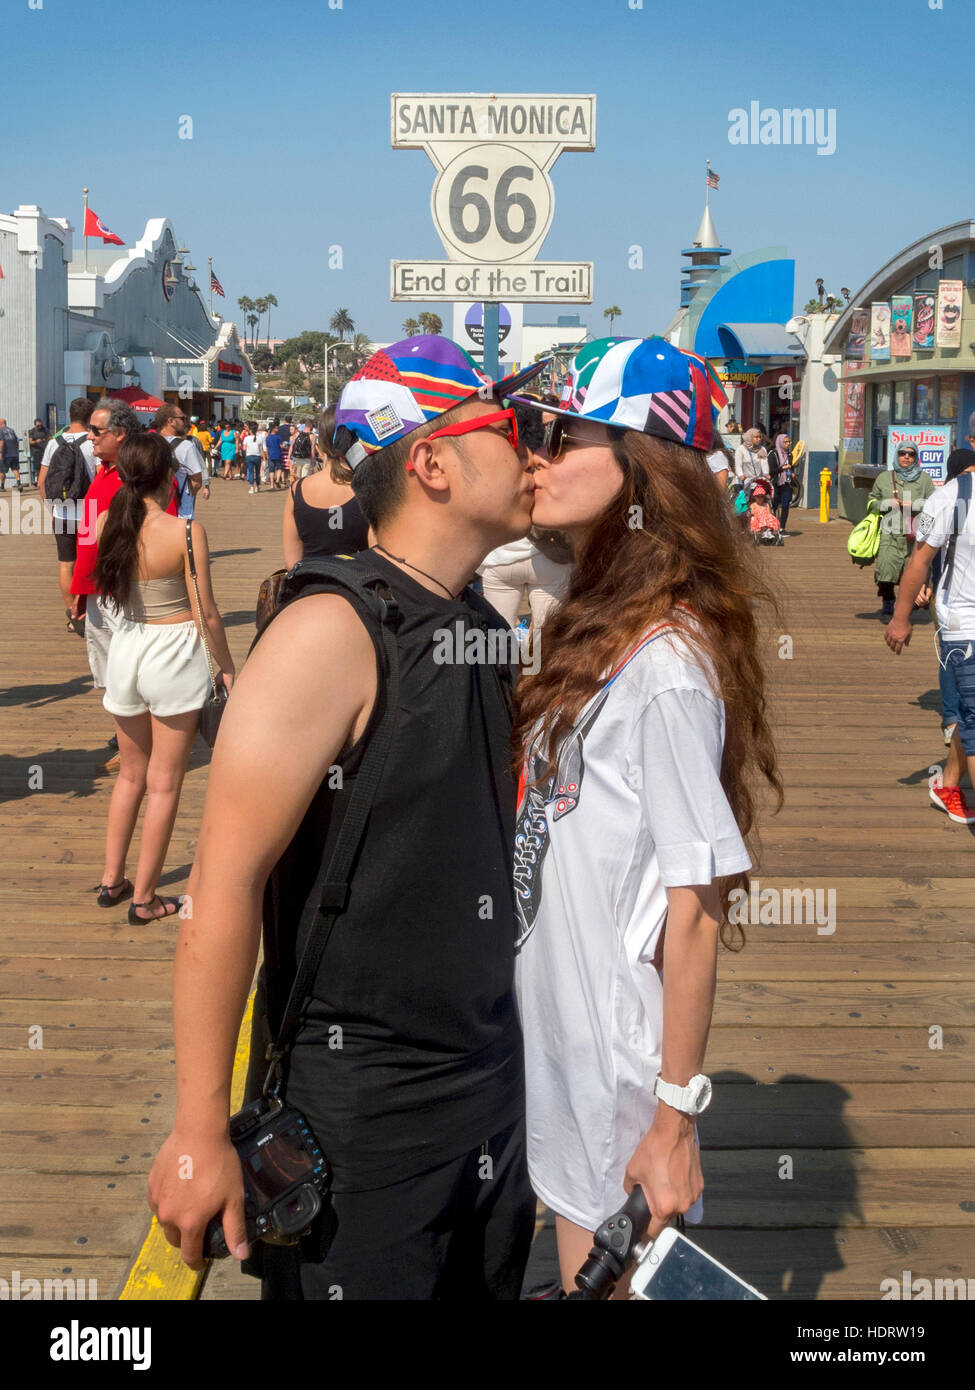 An Asian American couple kiss on the amusement pier in Santa Monica, CA, at the western end of US Route 66 highway. Note sign. Stock Photo